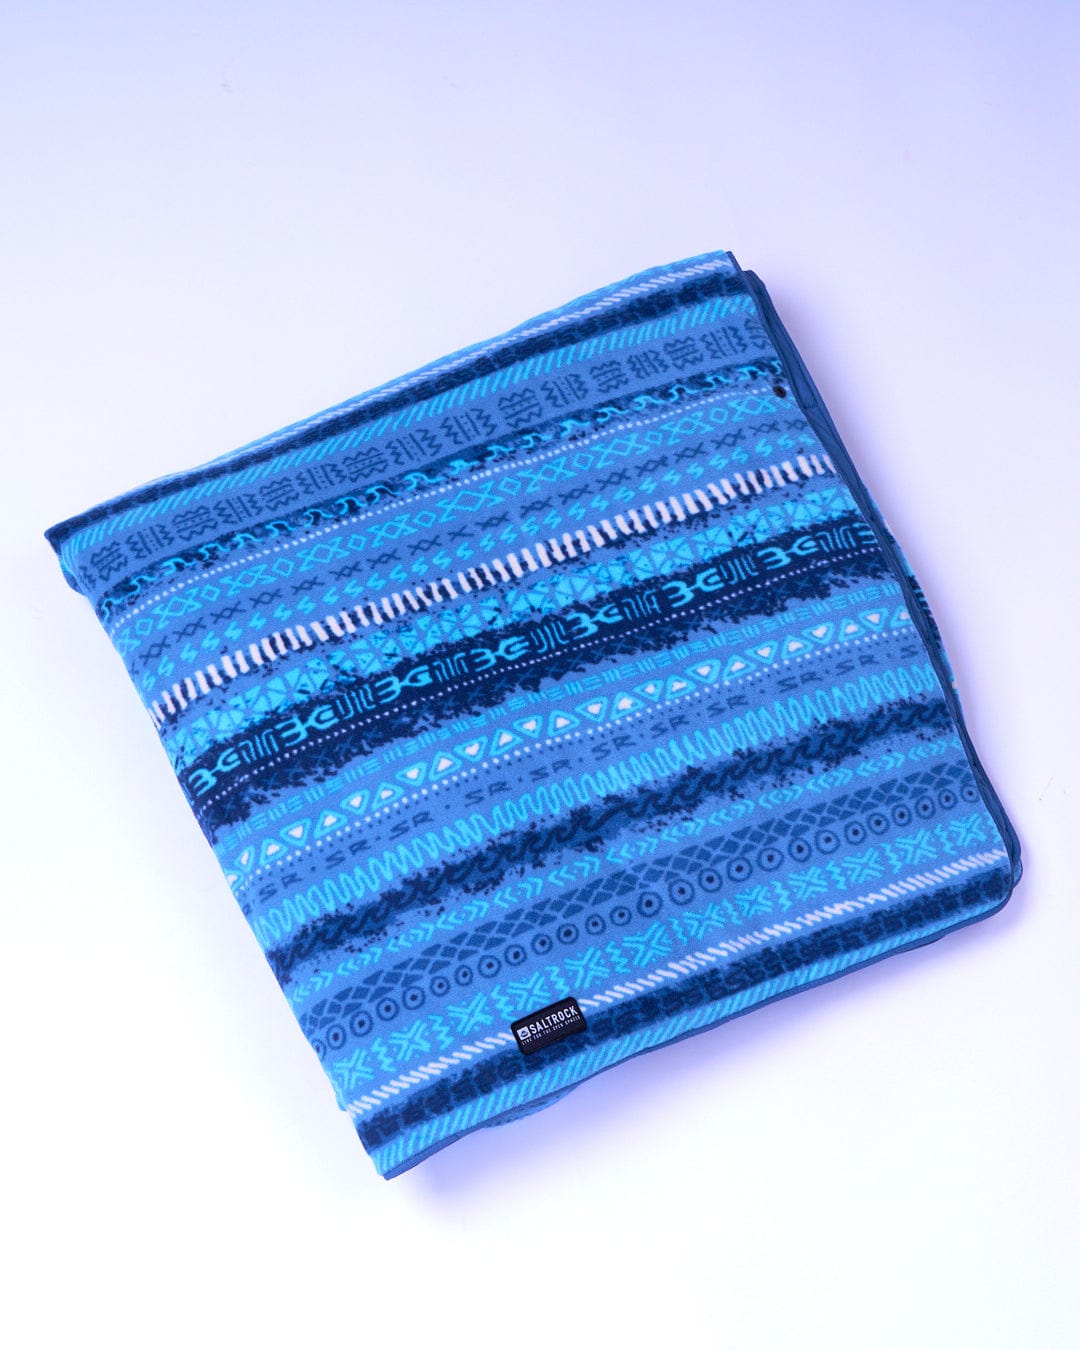 A Saltrock blue striped blanket on a white surface made from recycled material.